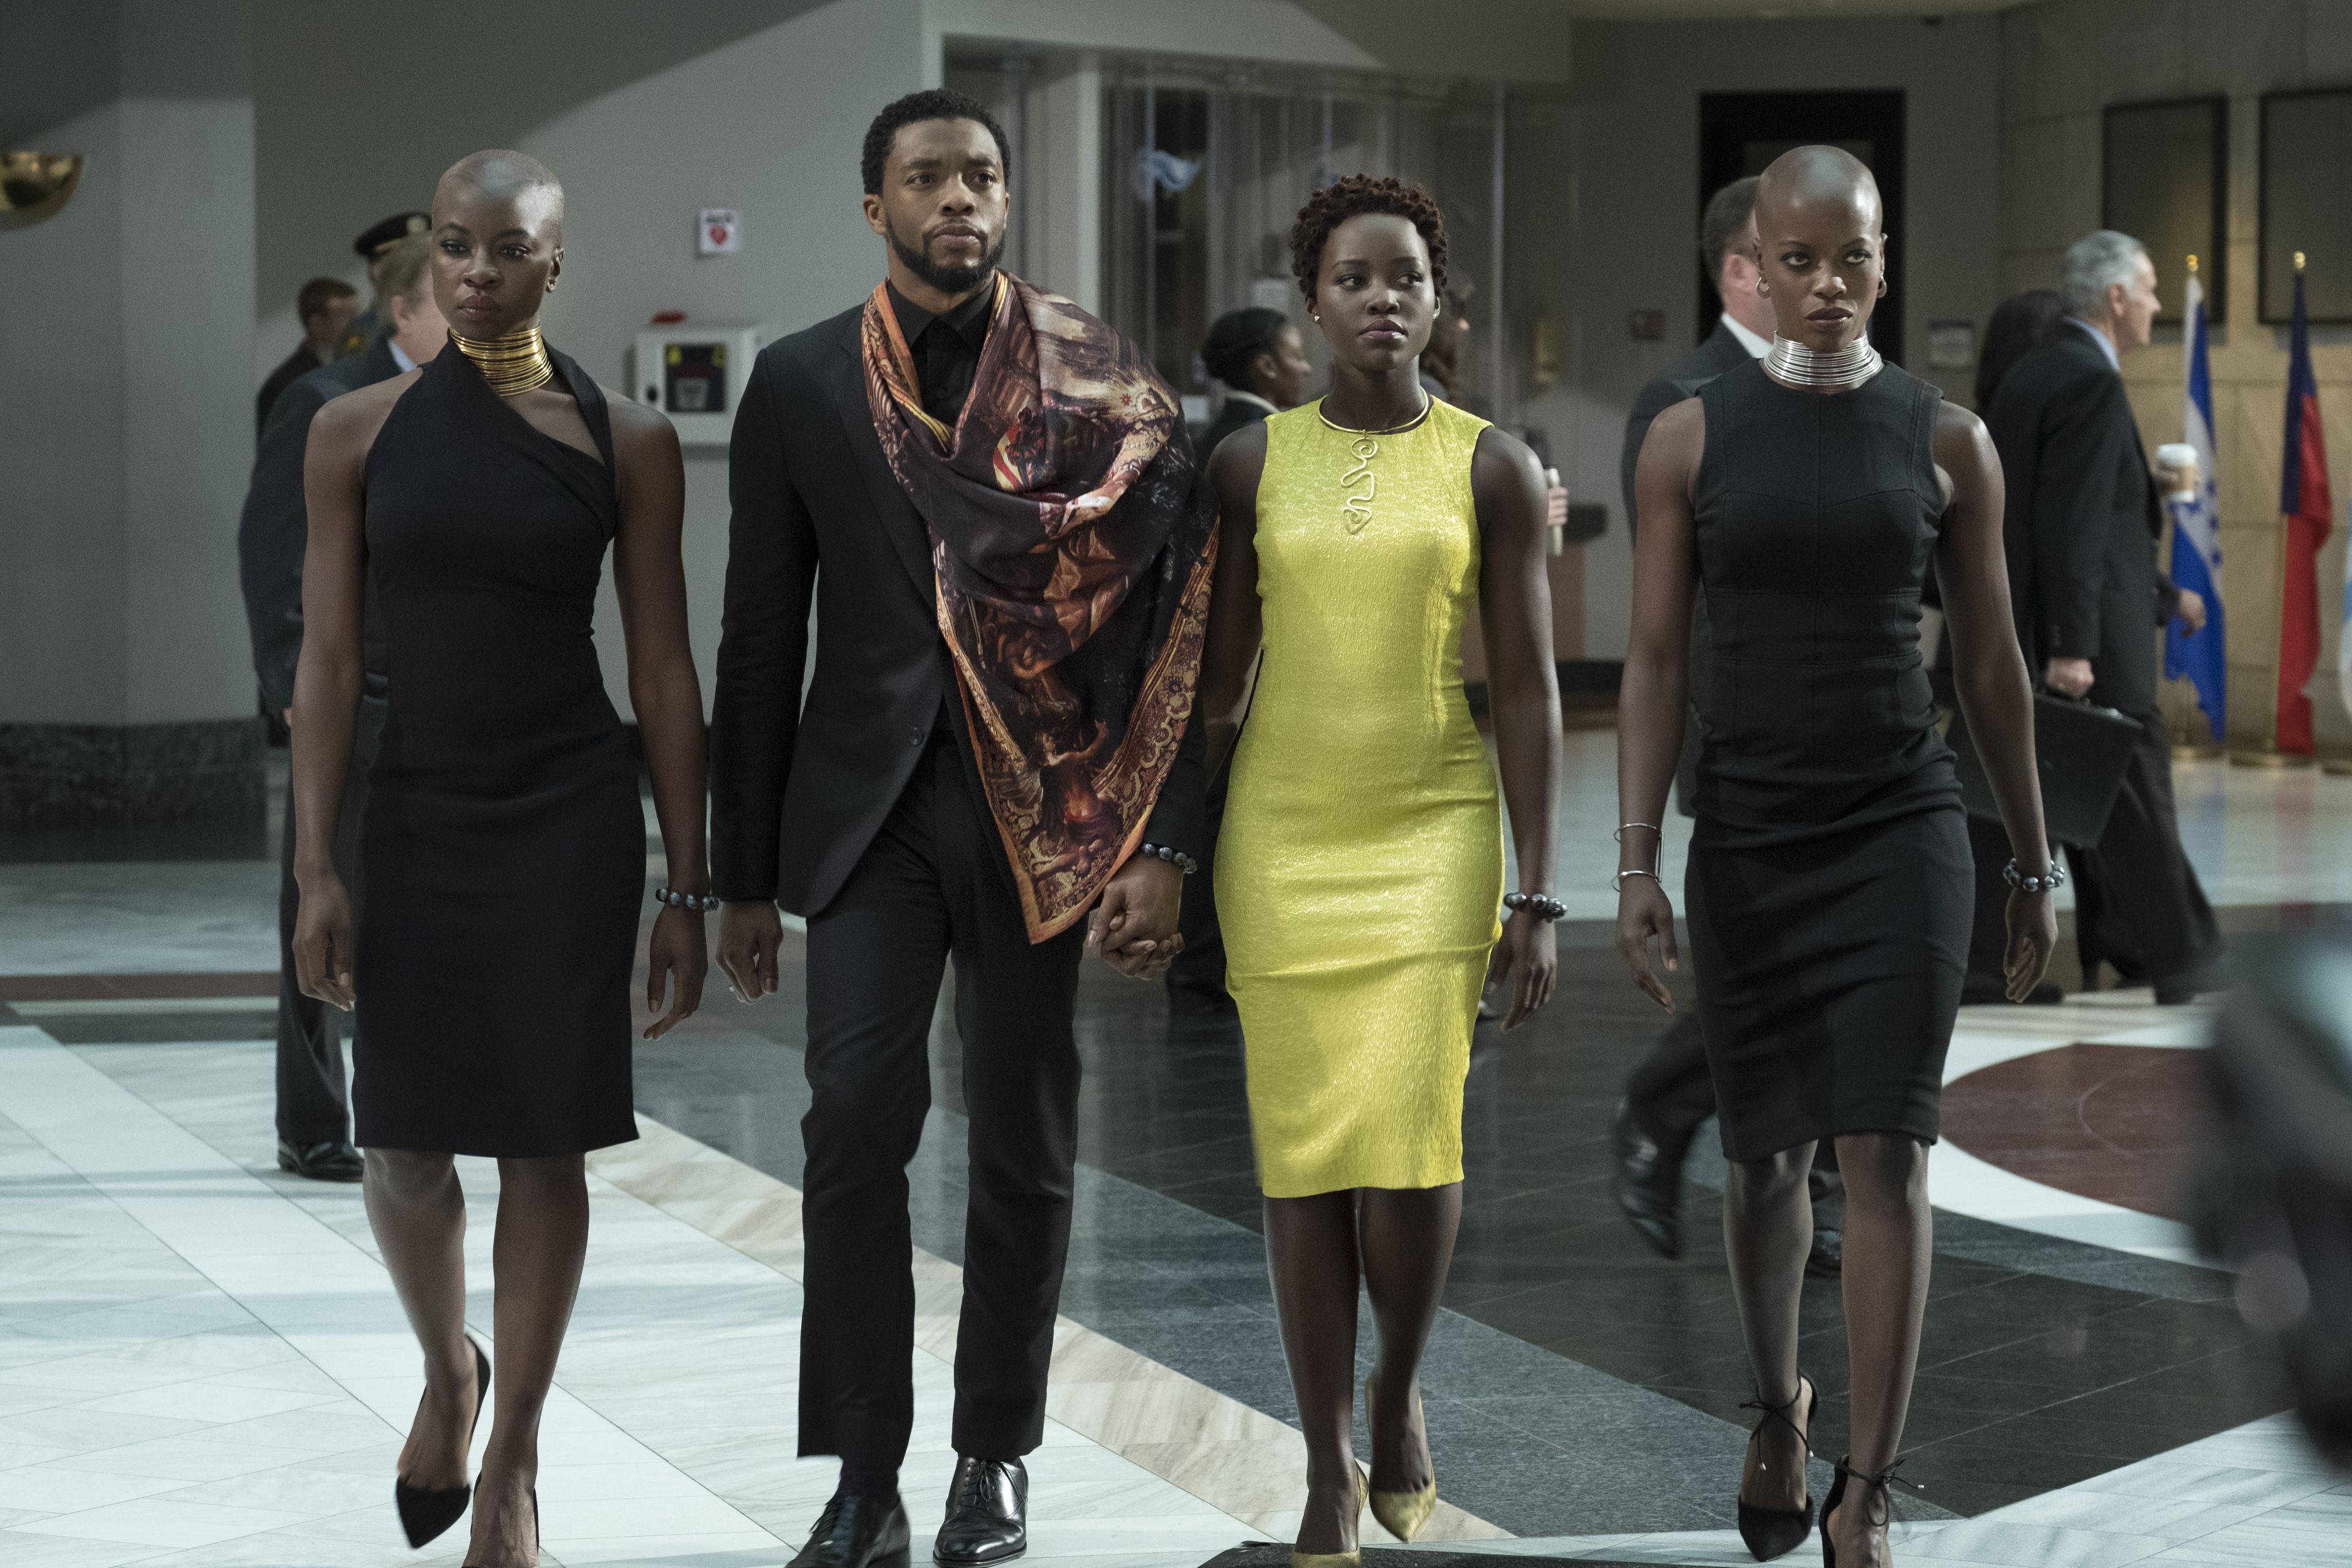 ART OF THE CUT on "Black Panther" with editor Michael Shawver 54